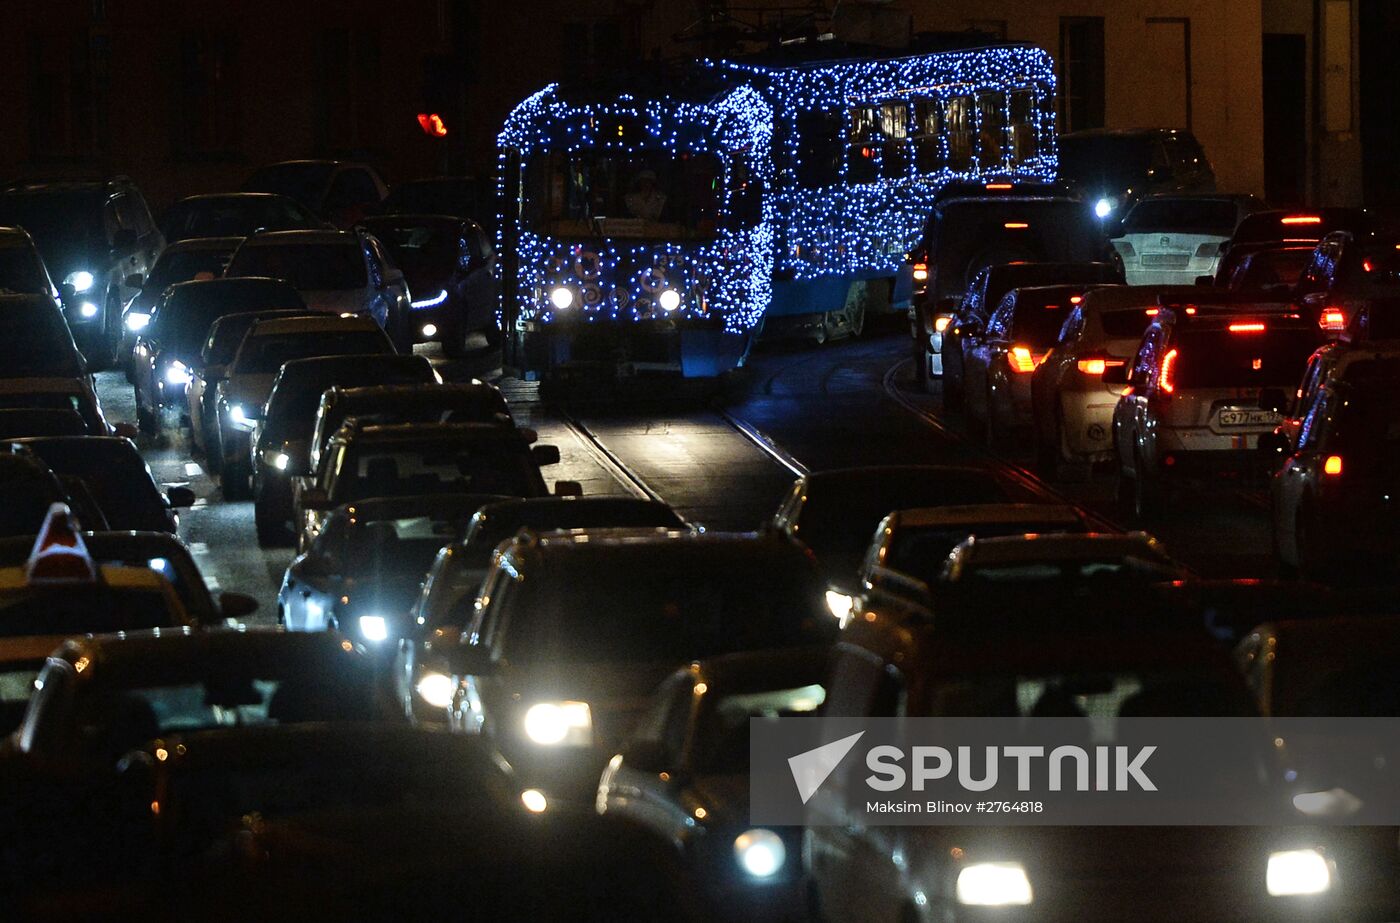 Christmas Tram on Moscow Streets